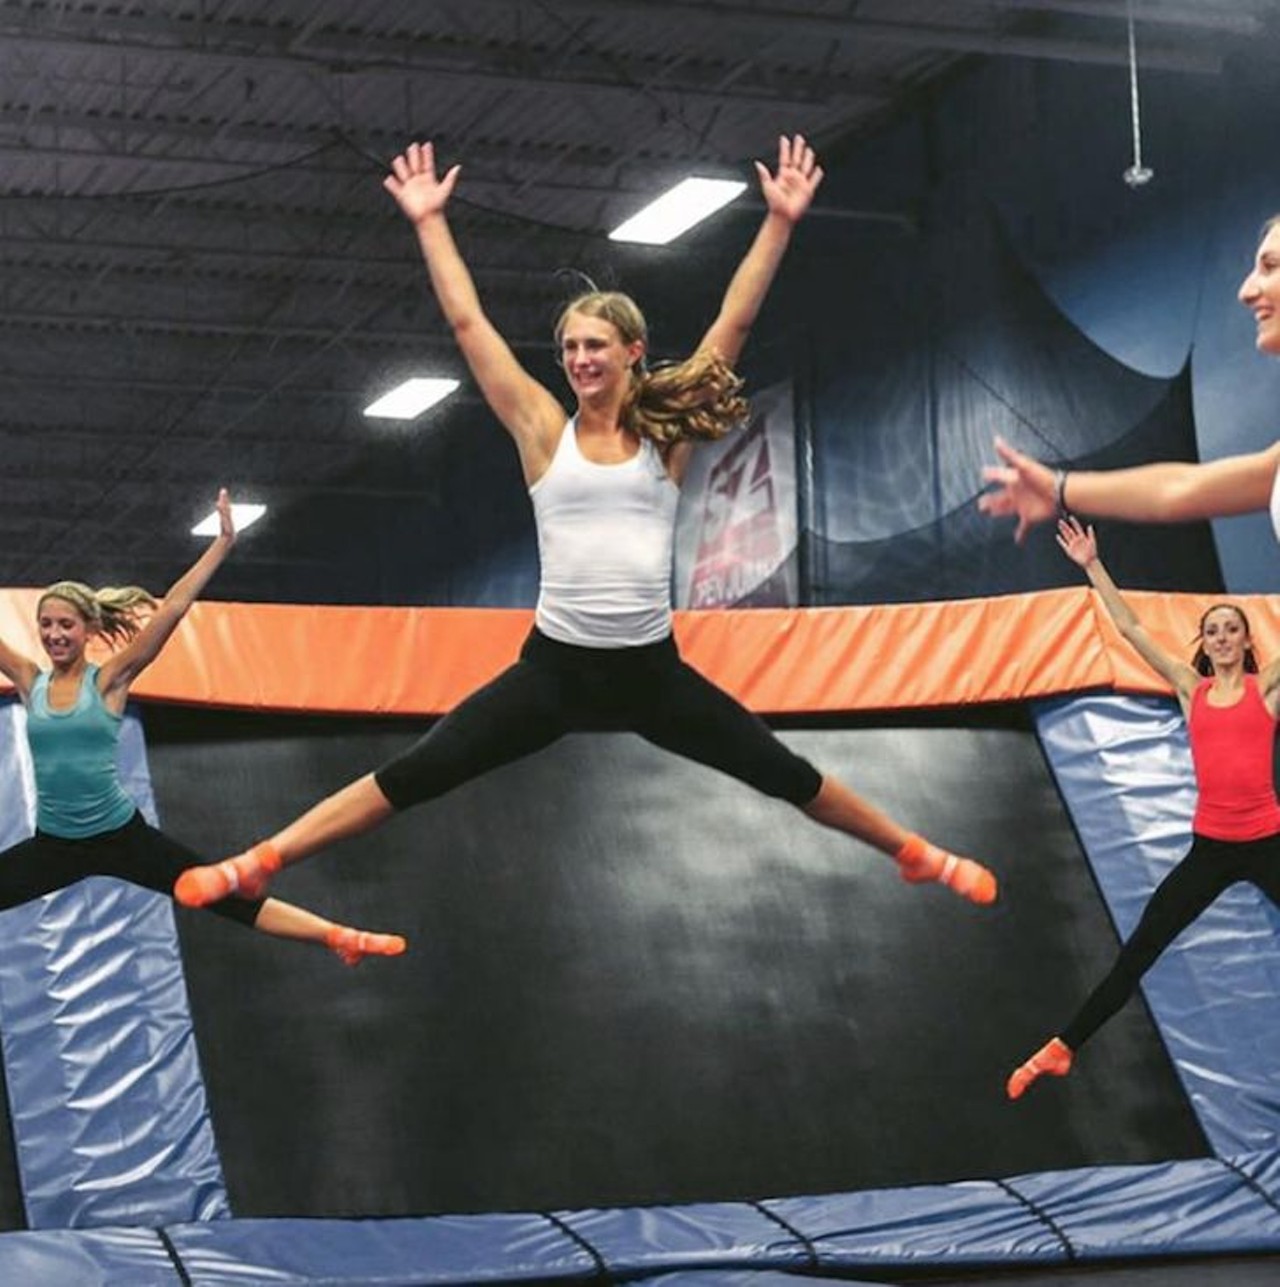  Flip your lid at Sky Zone 
5250 International Drive, 407-326-0482, www.skyzone.com 
While Sky Zone has your traditional freestyle jump and foam pit, it also takes trampolines and sports to new levels with their programs like Skyslam basketball and ultimate dodgeball. 
Photo via Sky Zone Orlando/Facebook